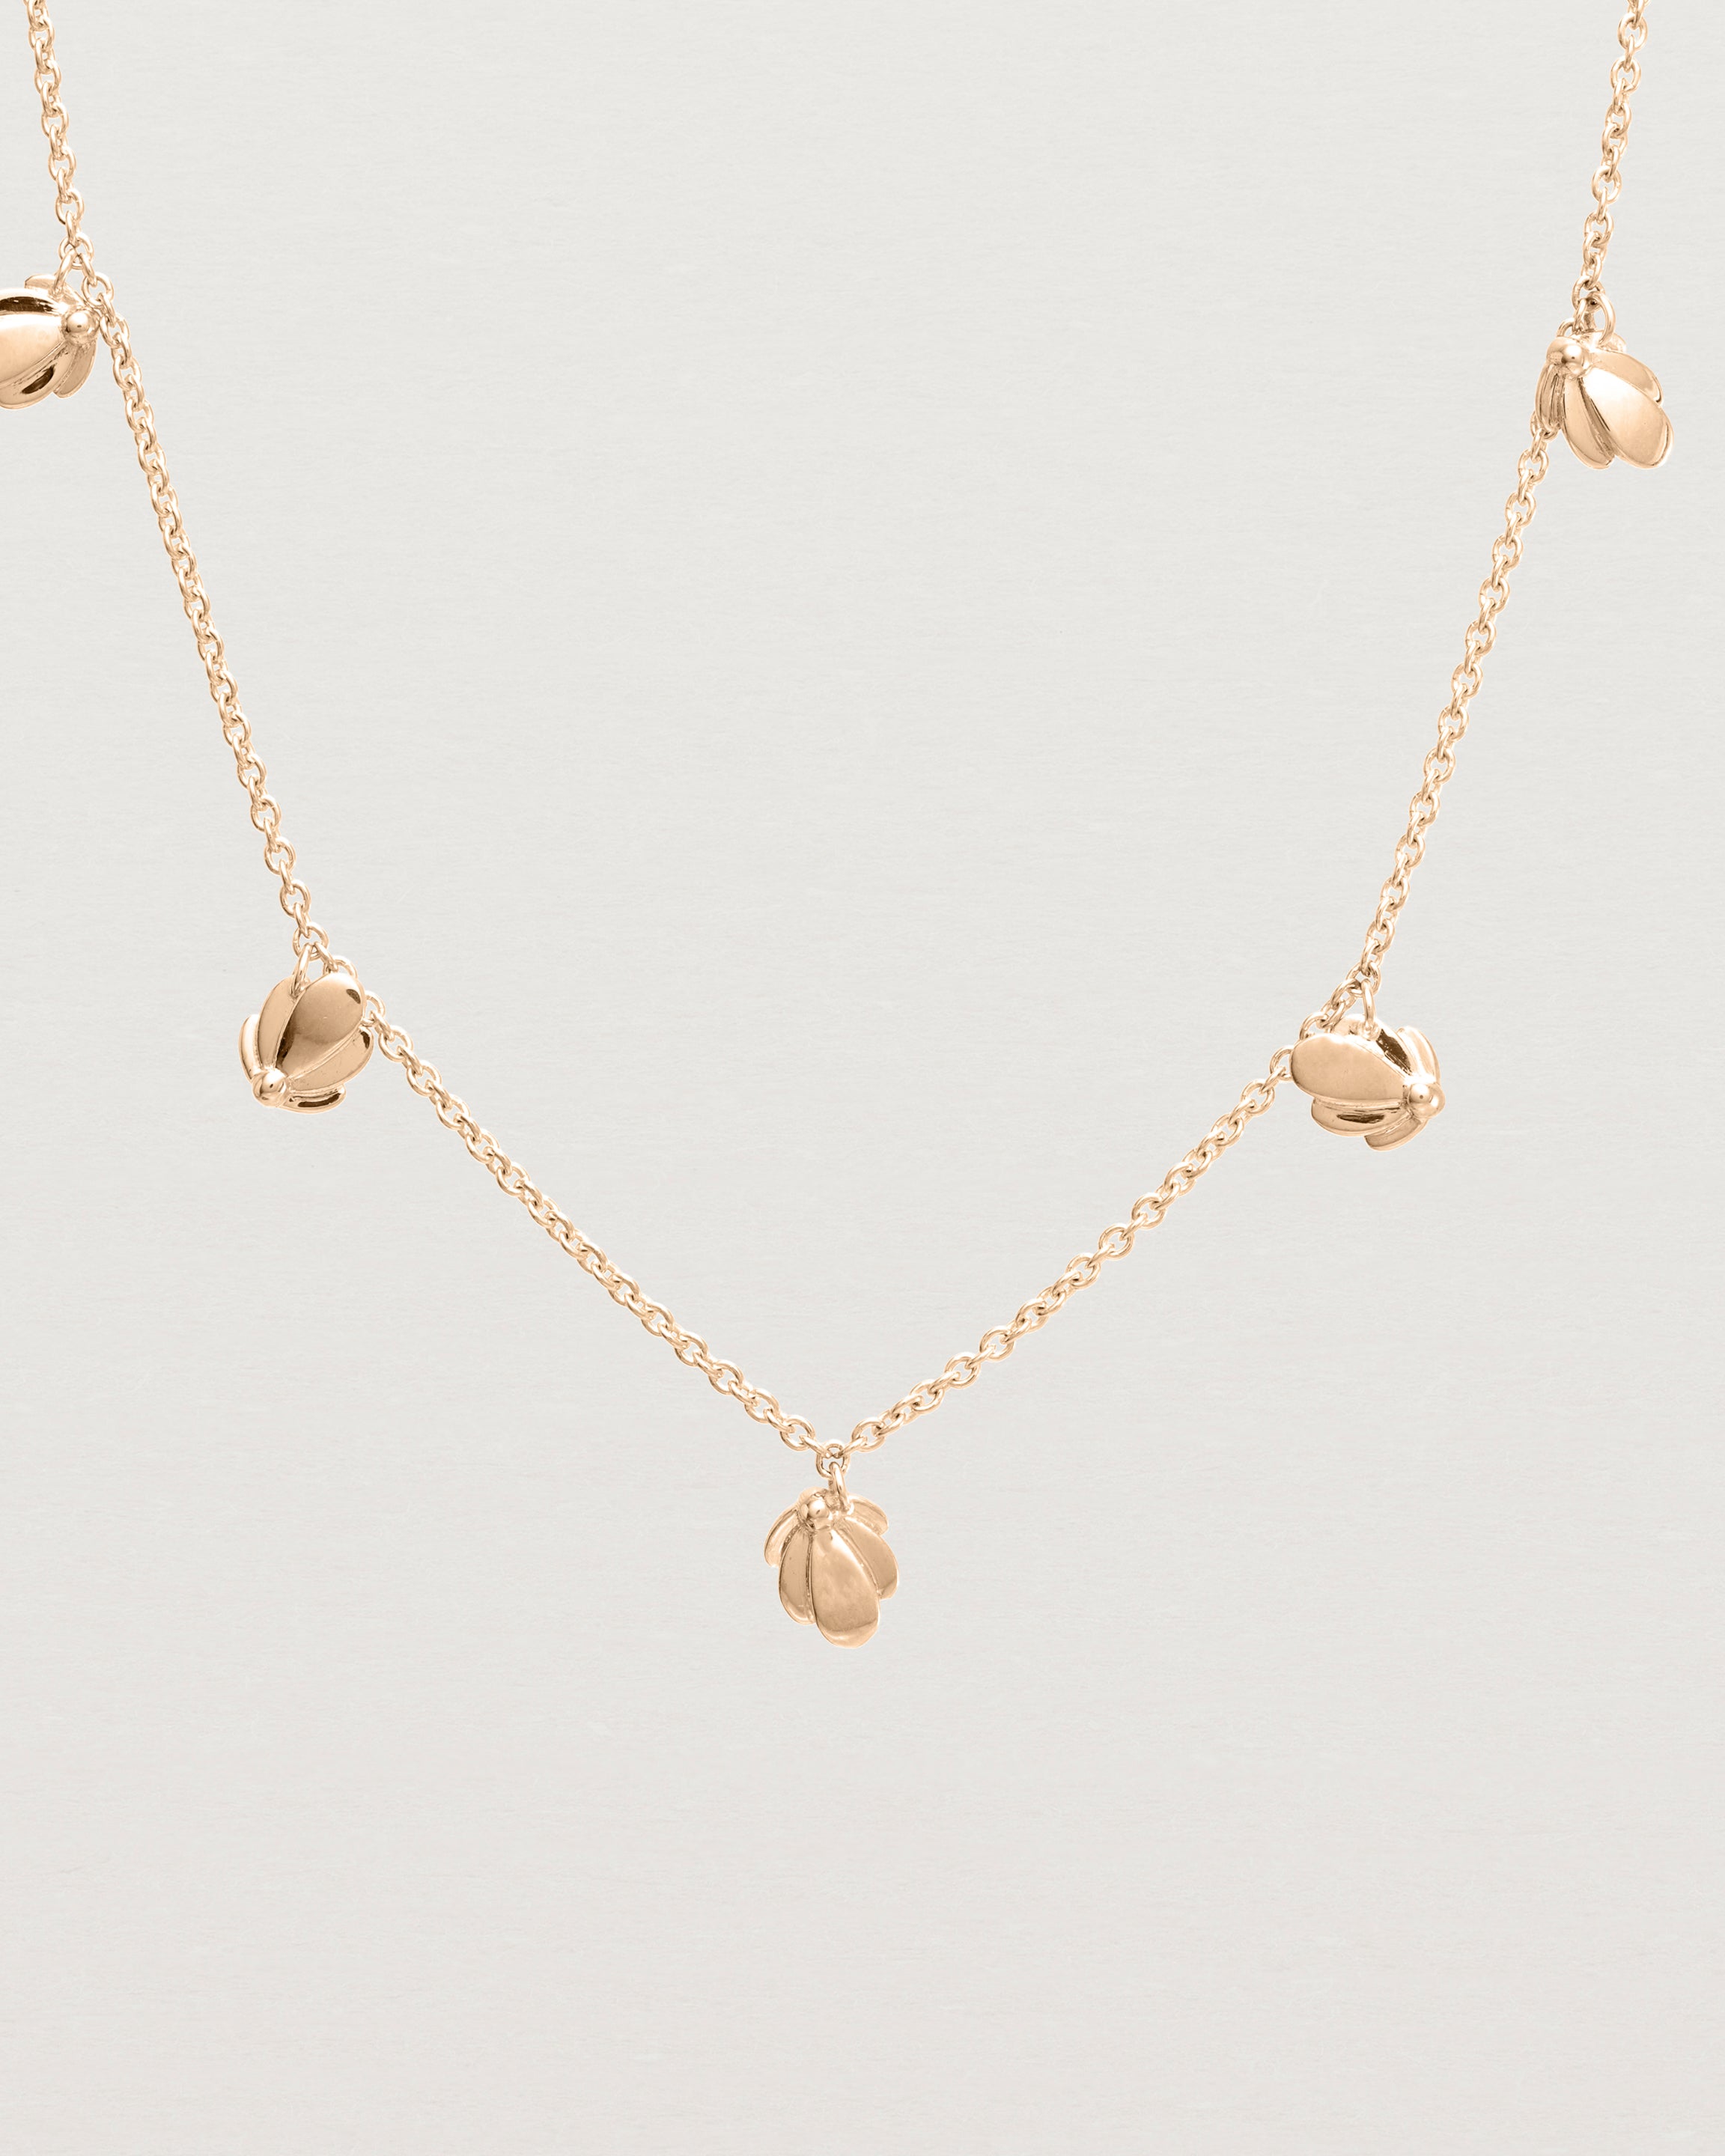 Close up view of the Aeris Charm Necklace in Rose Gold.